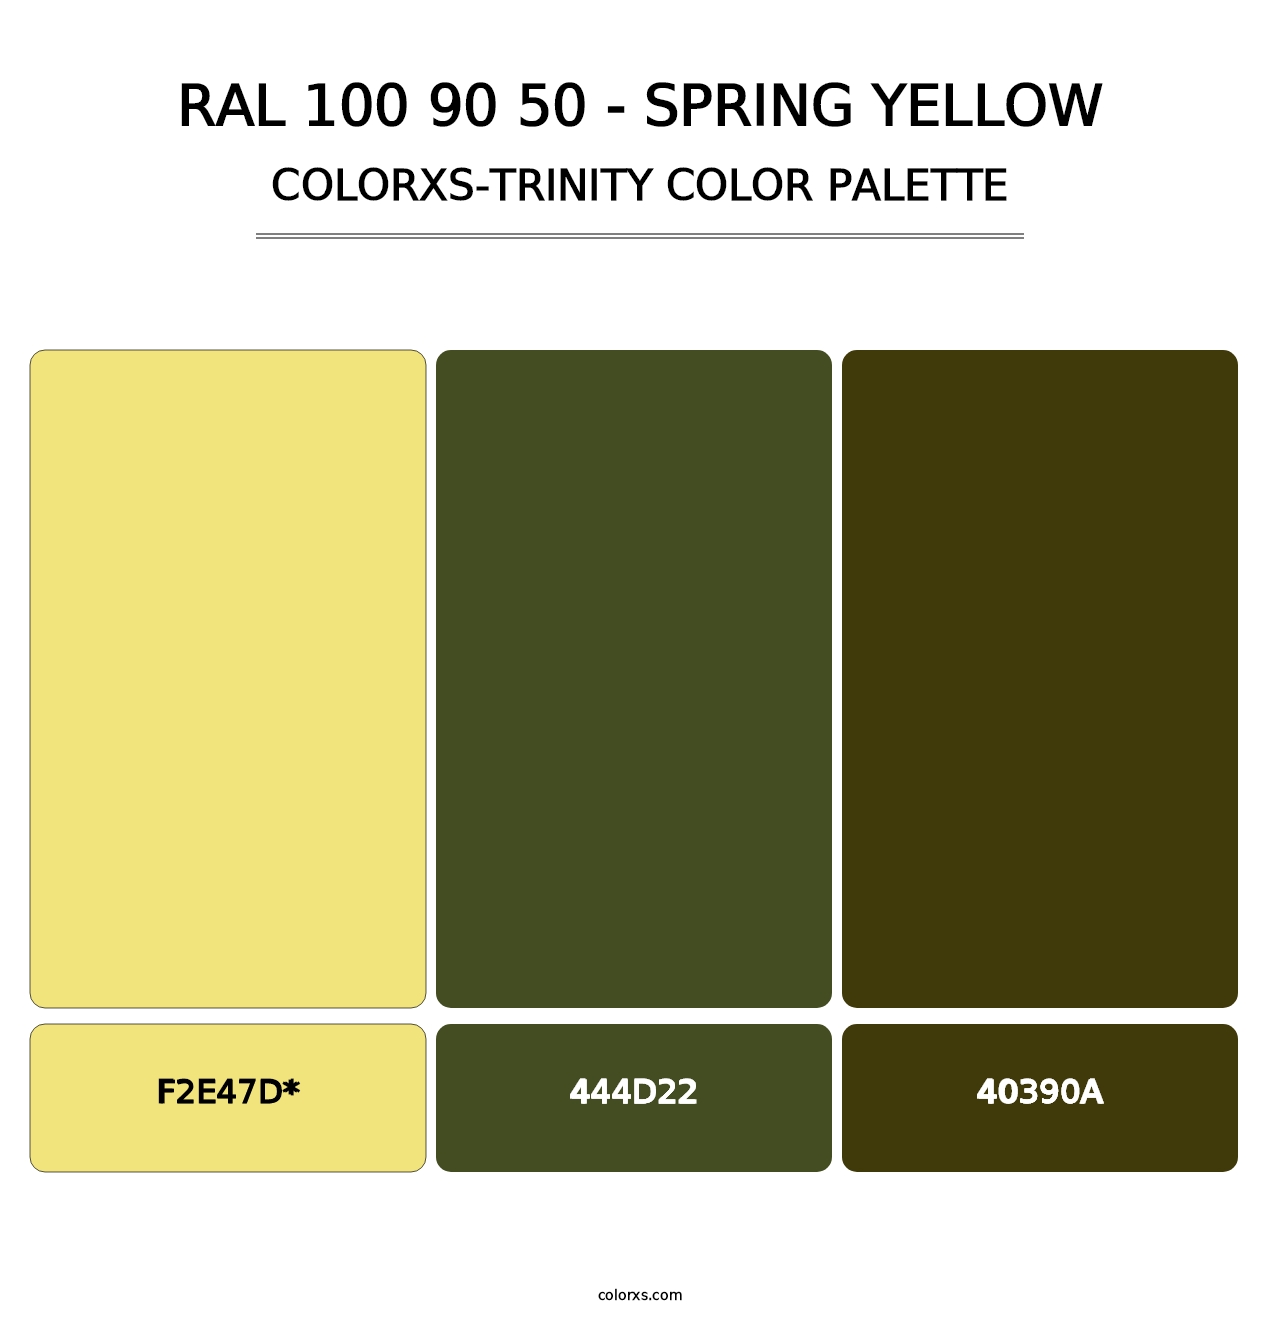 RAL 100 90 50 - Spring Yellow - Colorxs Trinity Palette